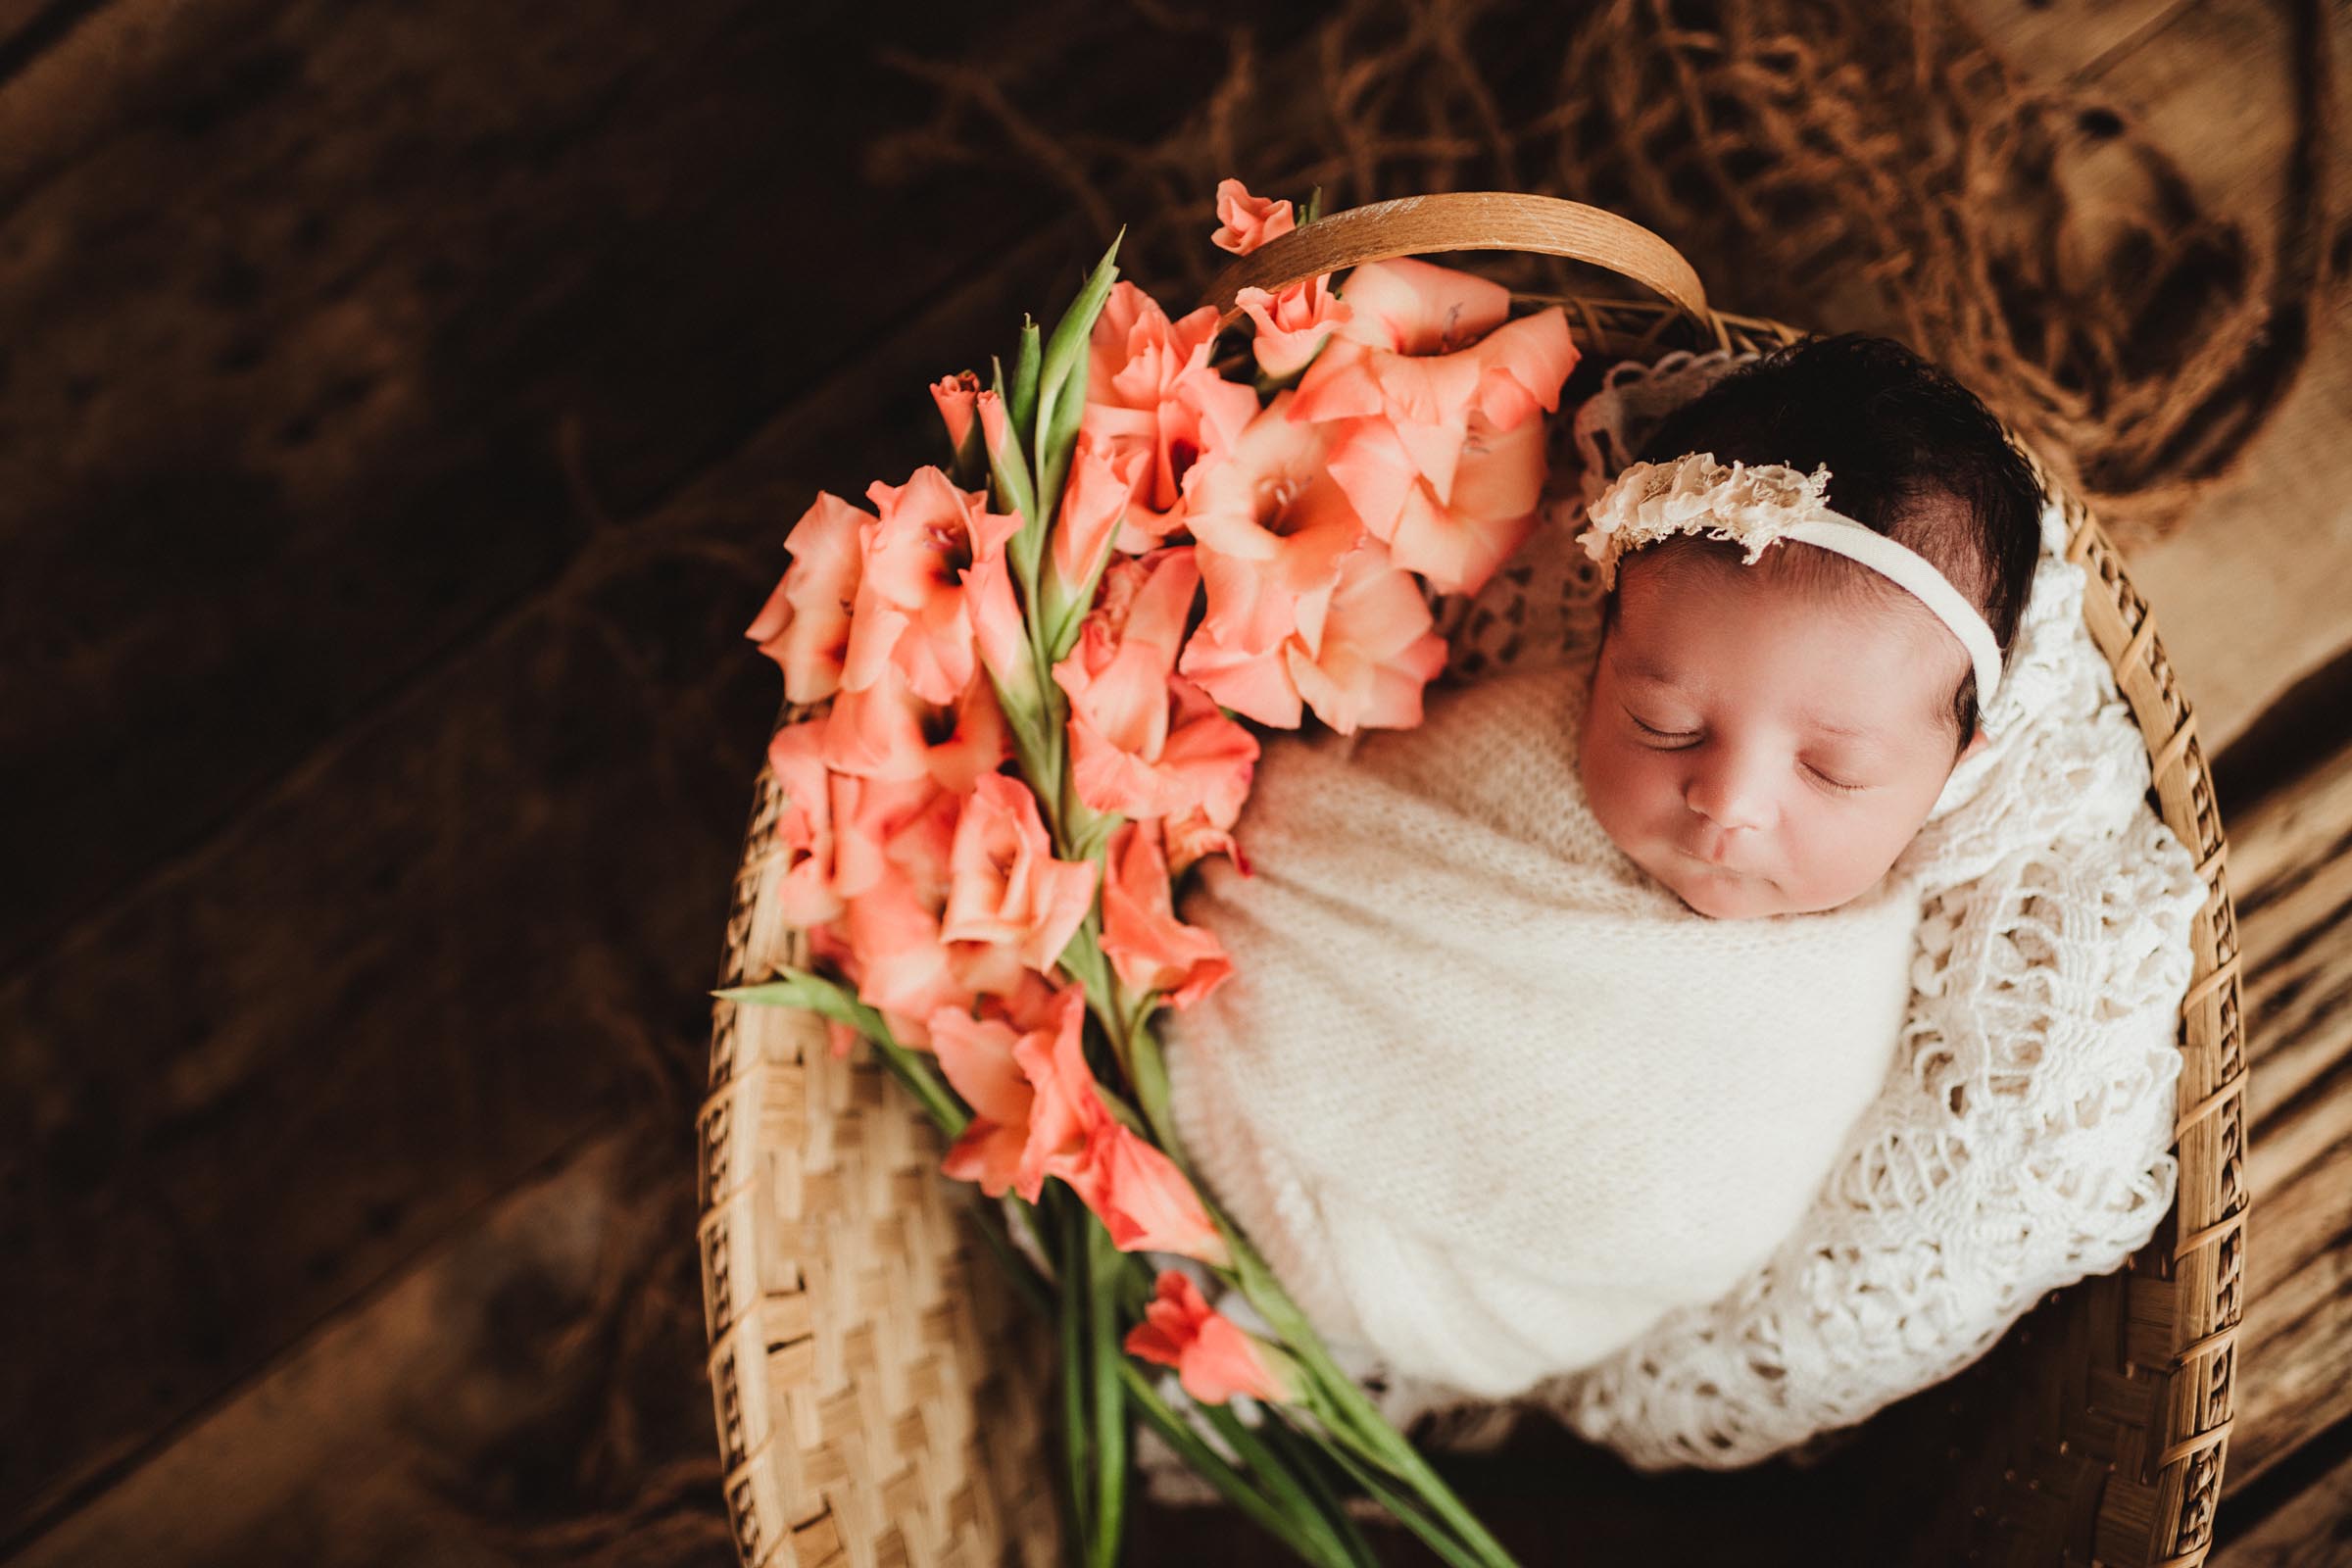 infant wrapped in an open basket with peach flowers